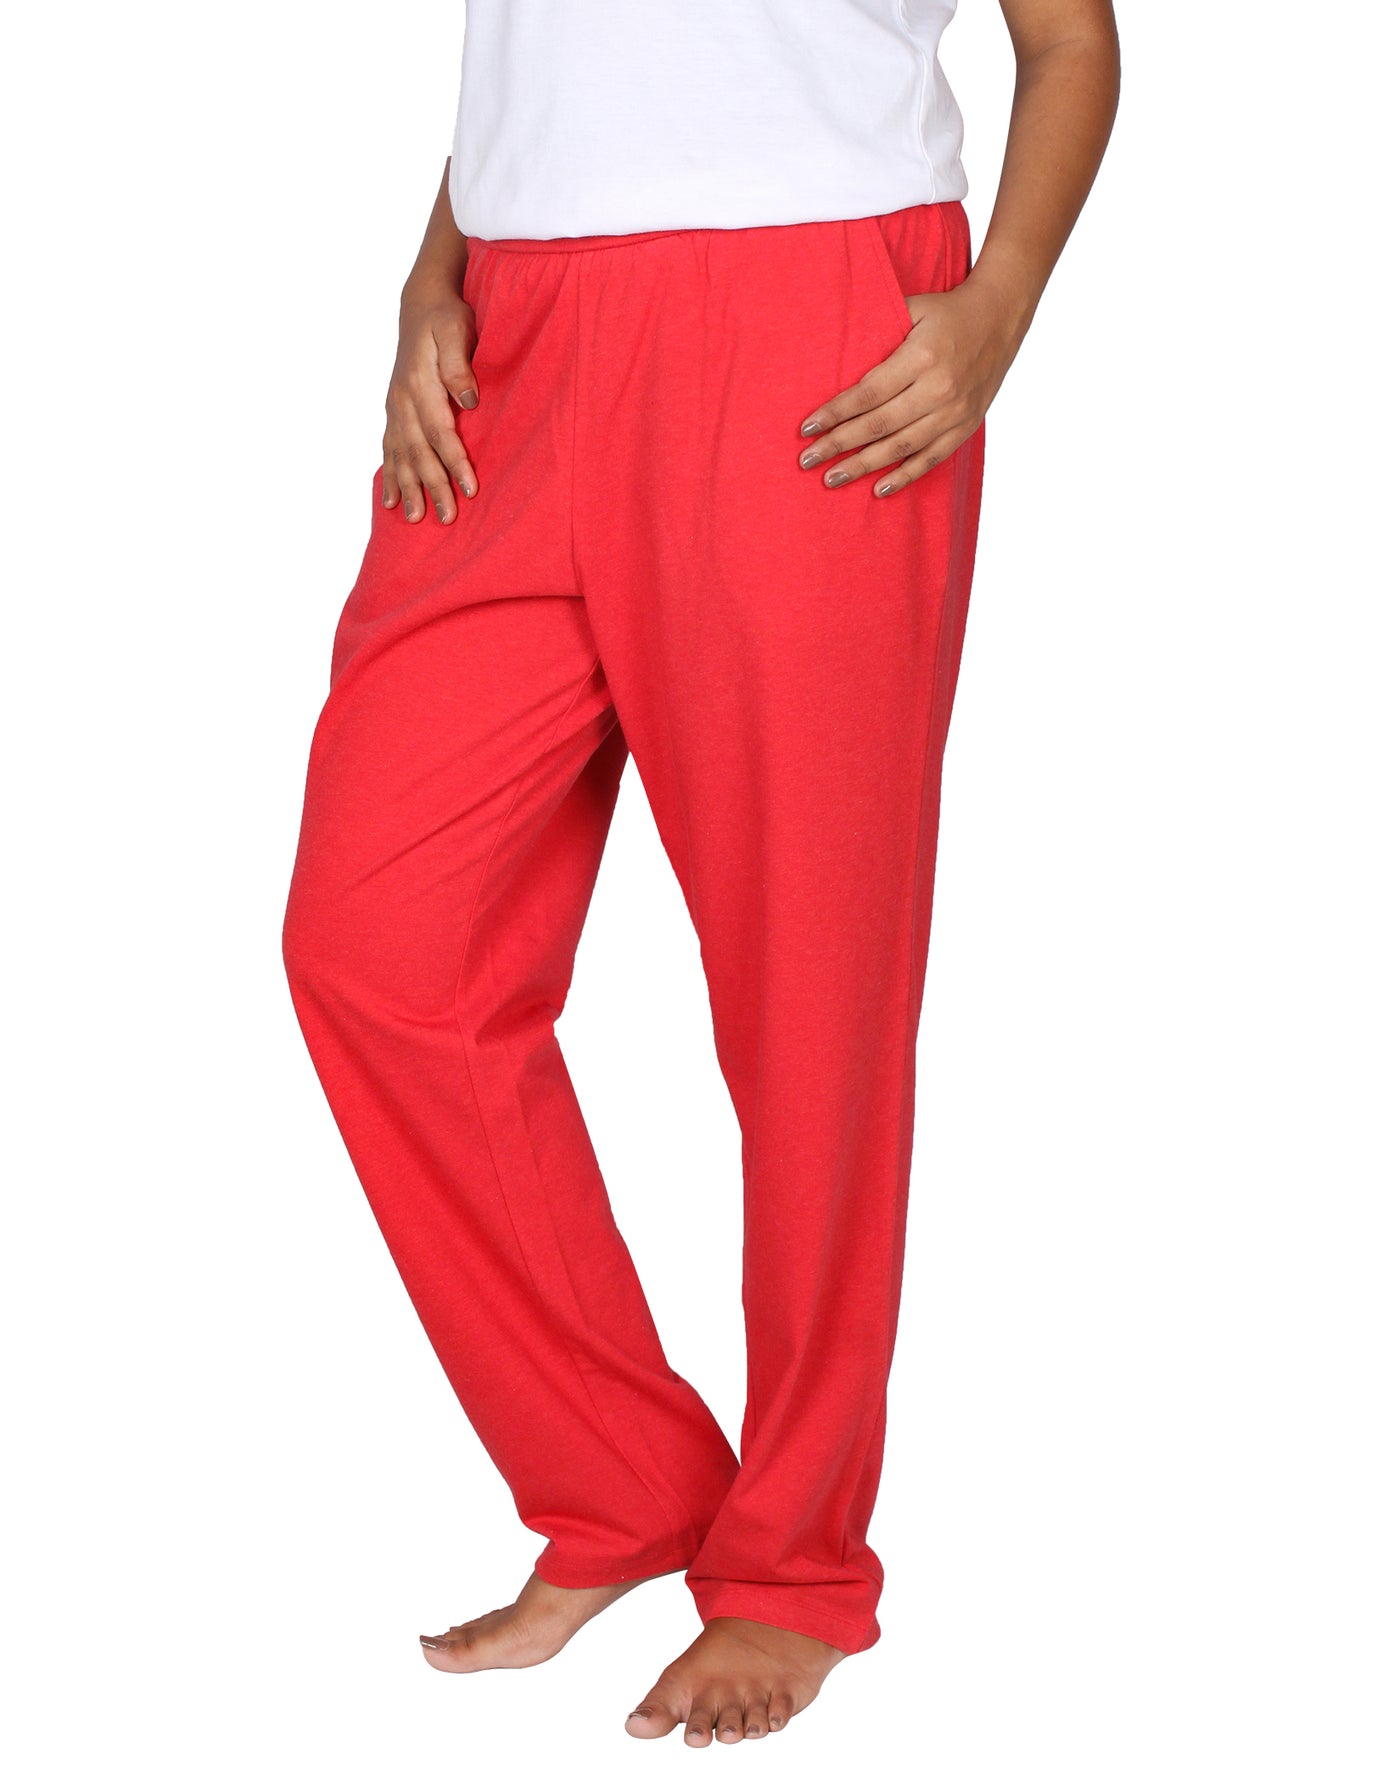 Lounge Pant for Women-Red Circus(Pack of 2)